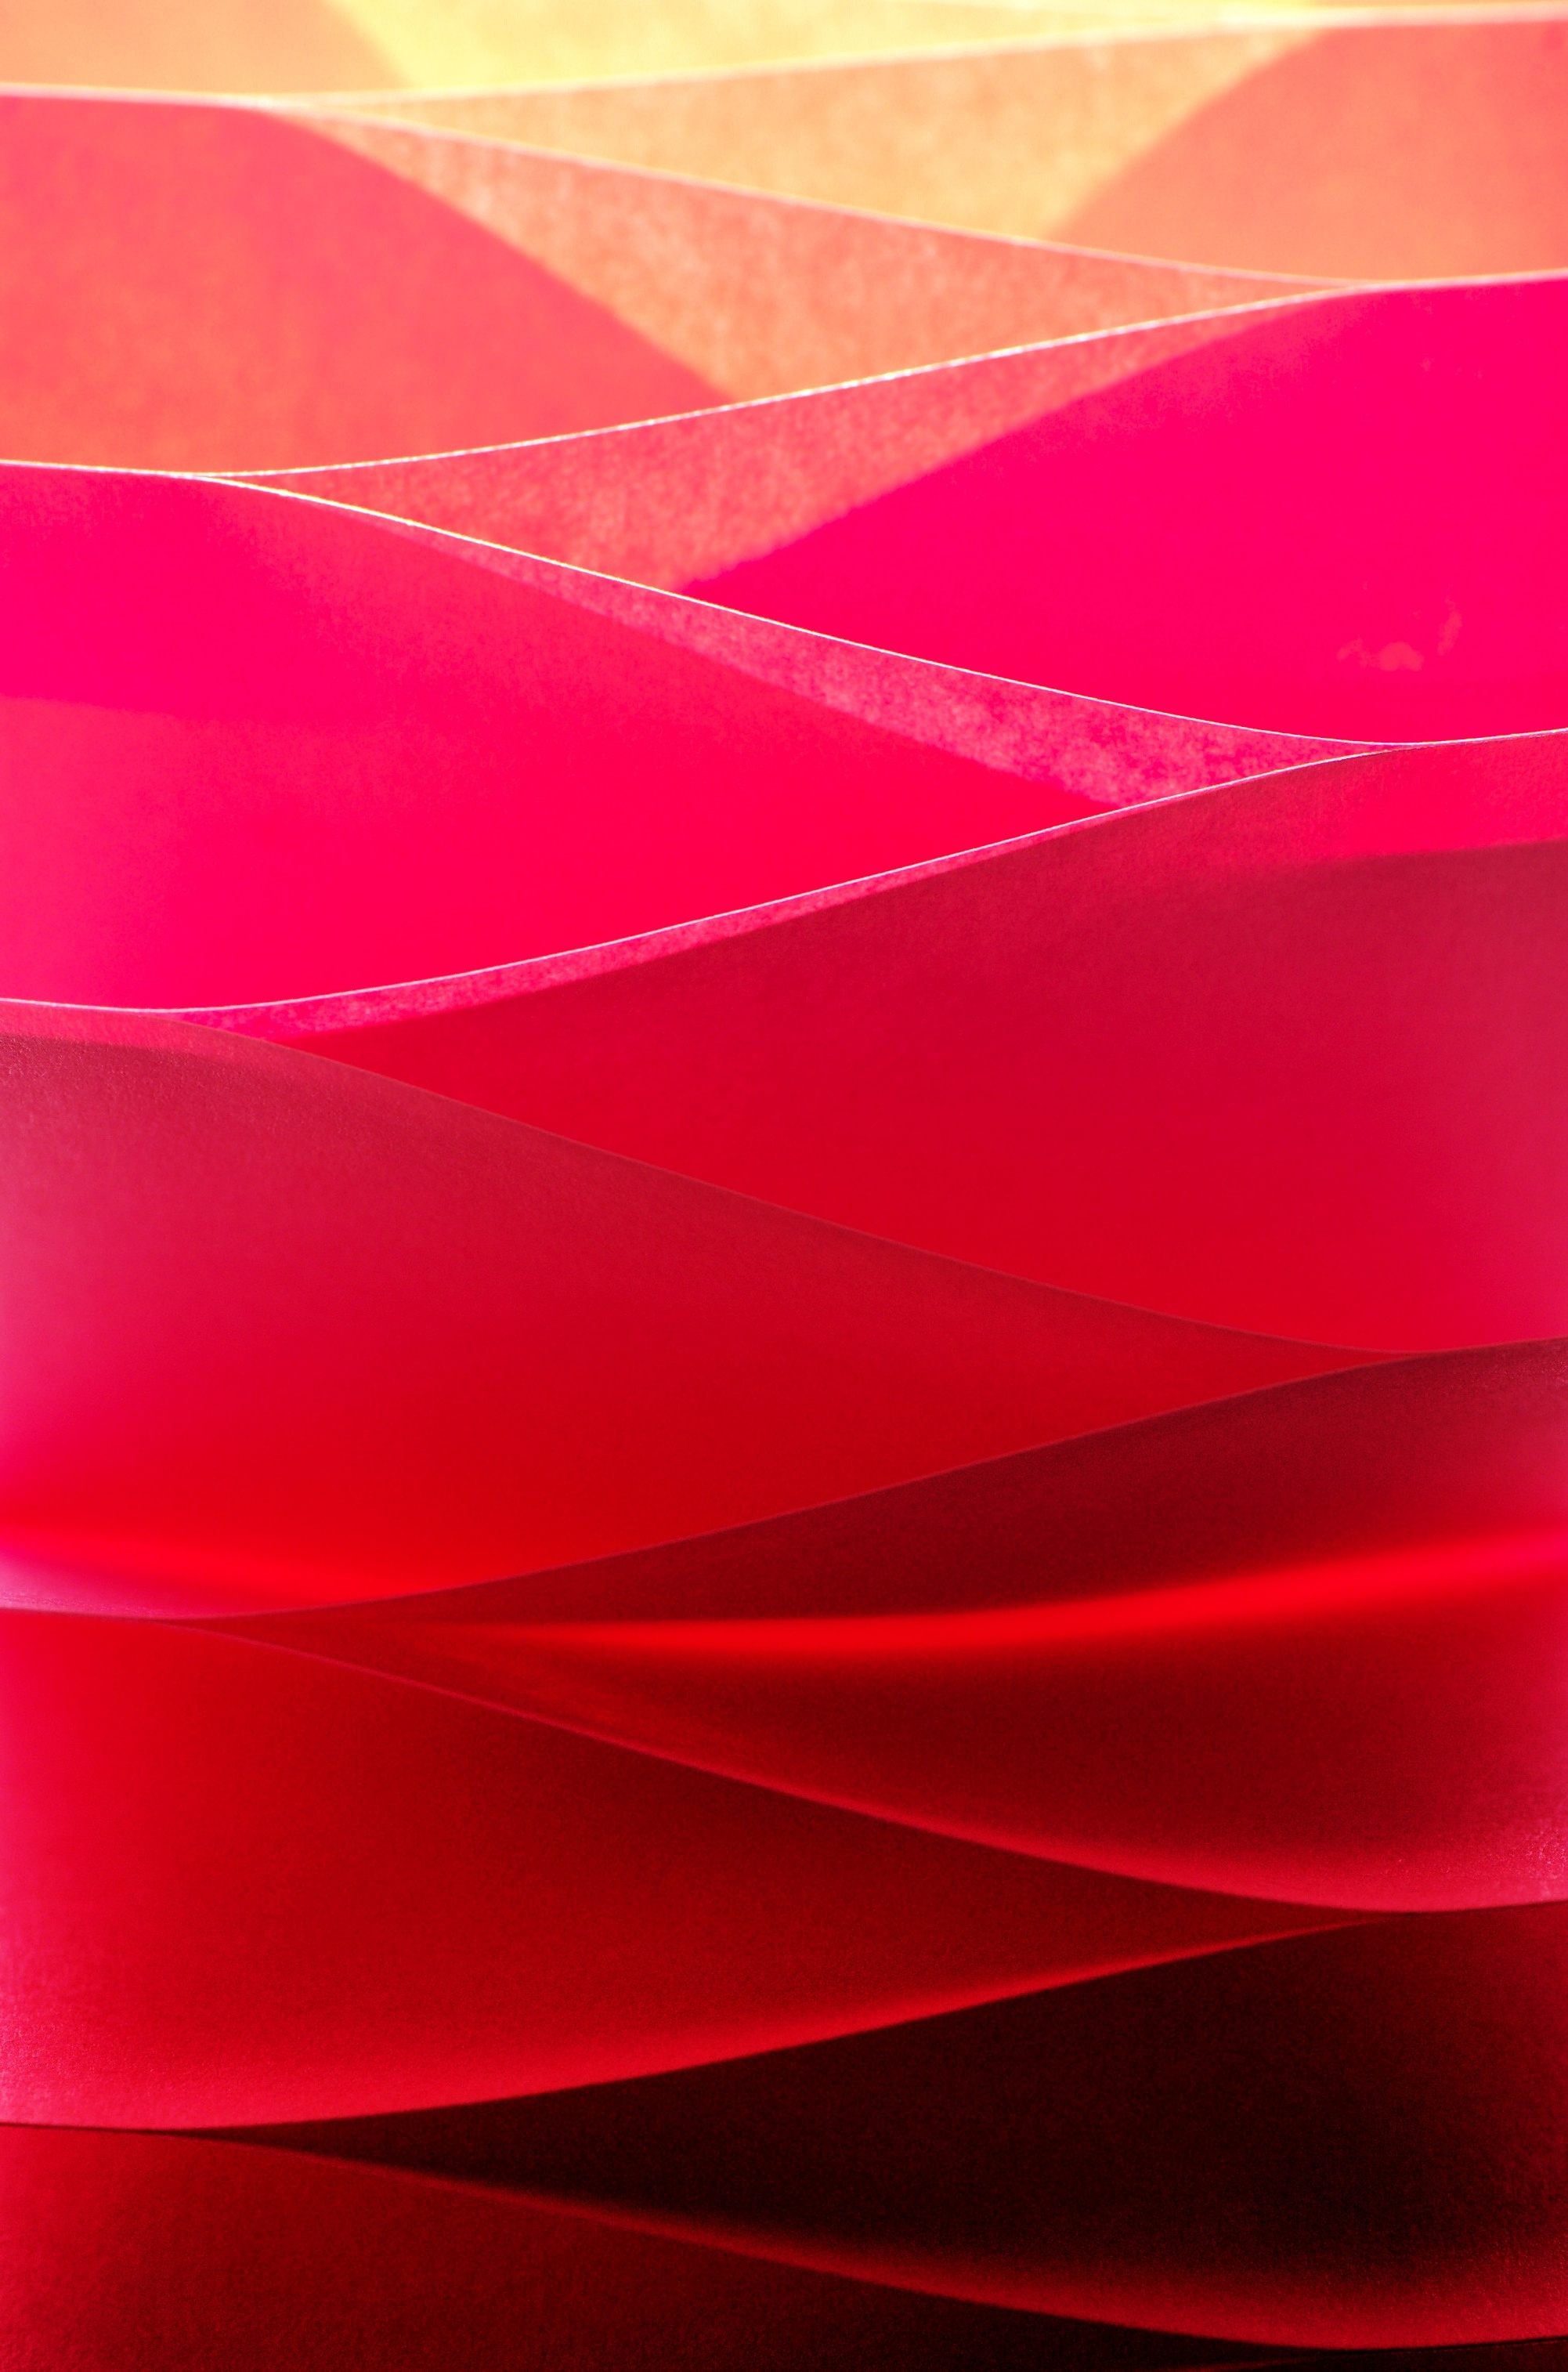 layers, red, macro HD Wallpaper for Phone